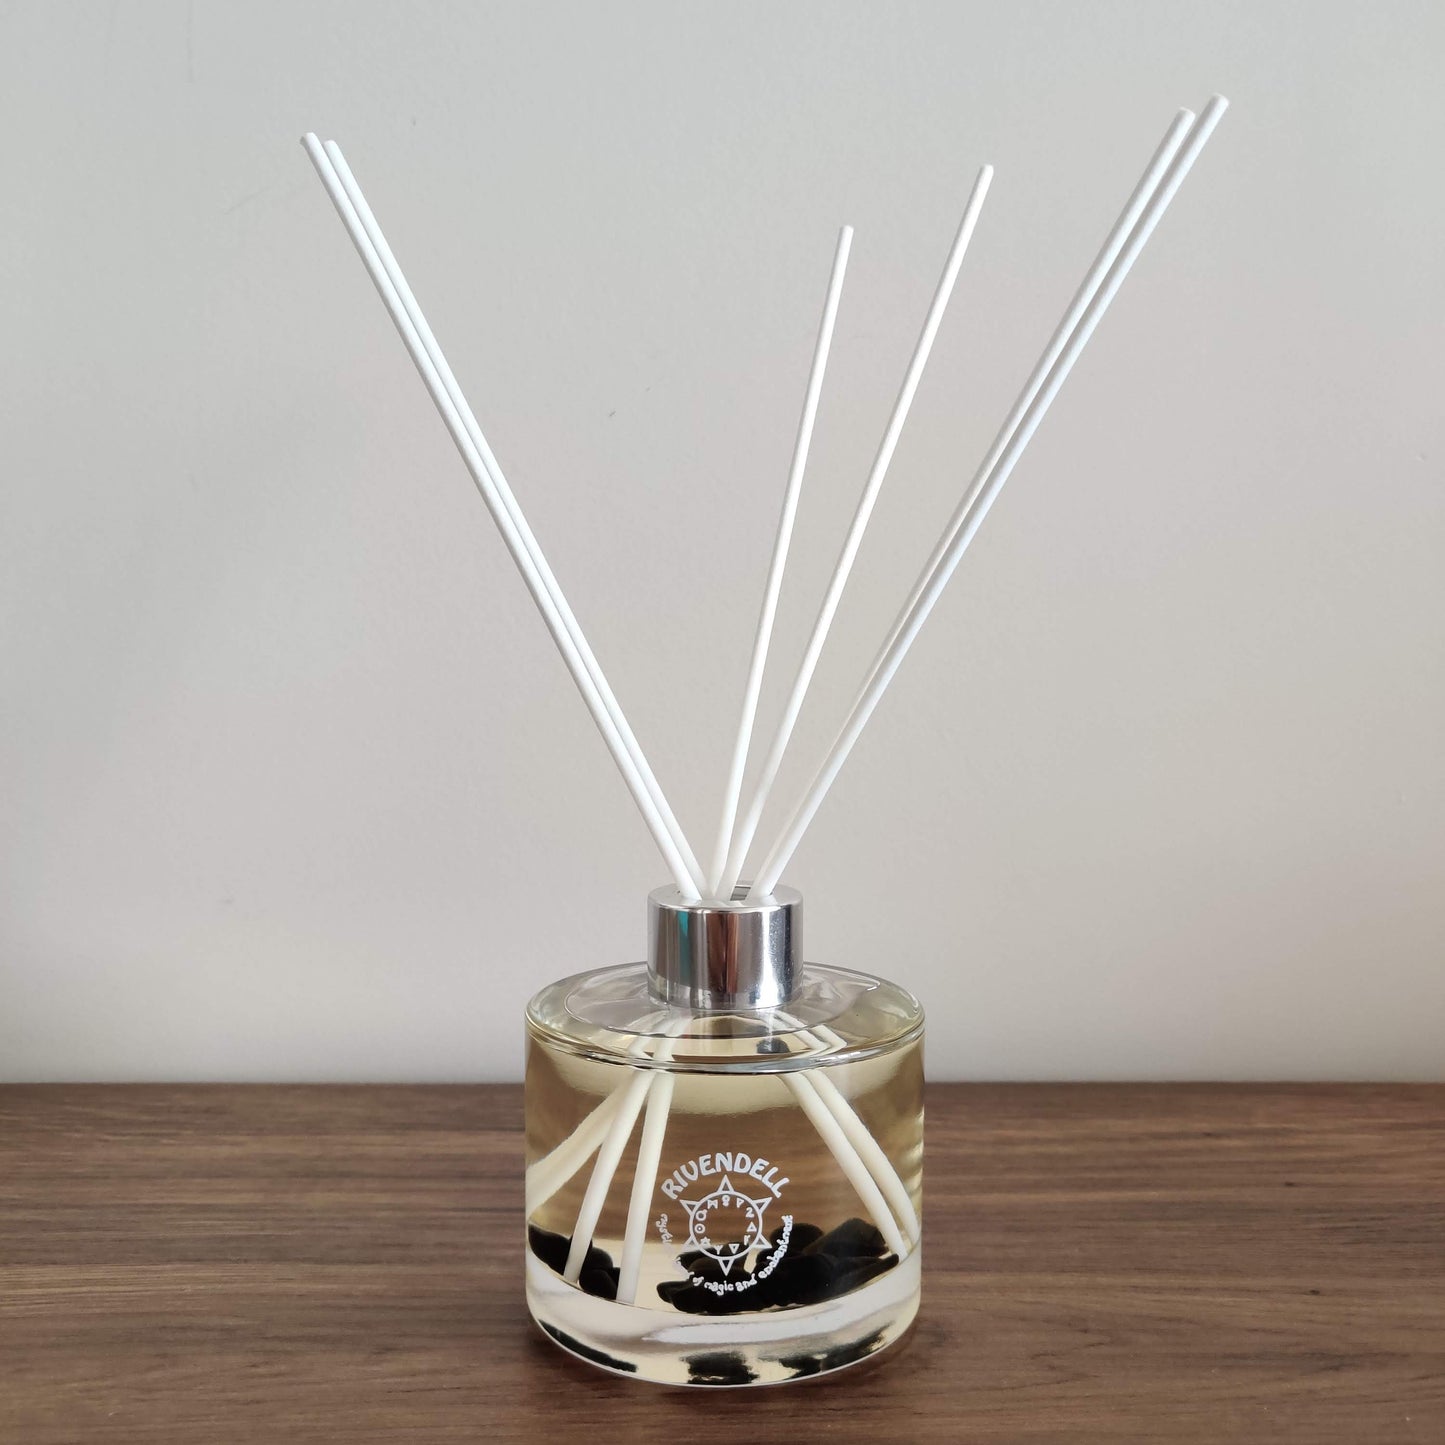 Rivendell Aroma: Obsidian x Sea Salt and Sage Crystal-Infused Reed Diffuser - Rivendell Shop